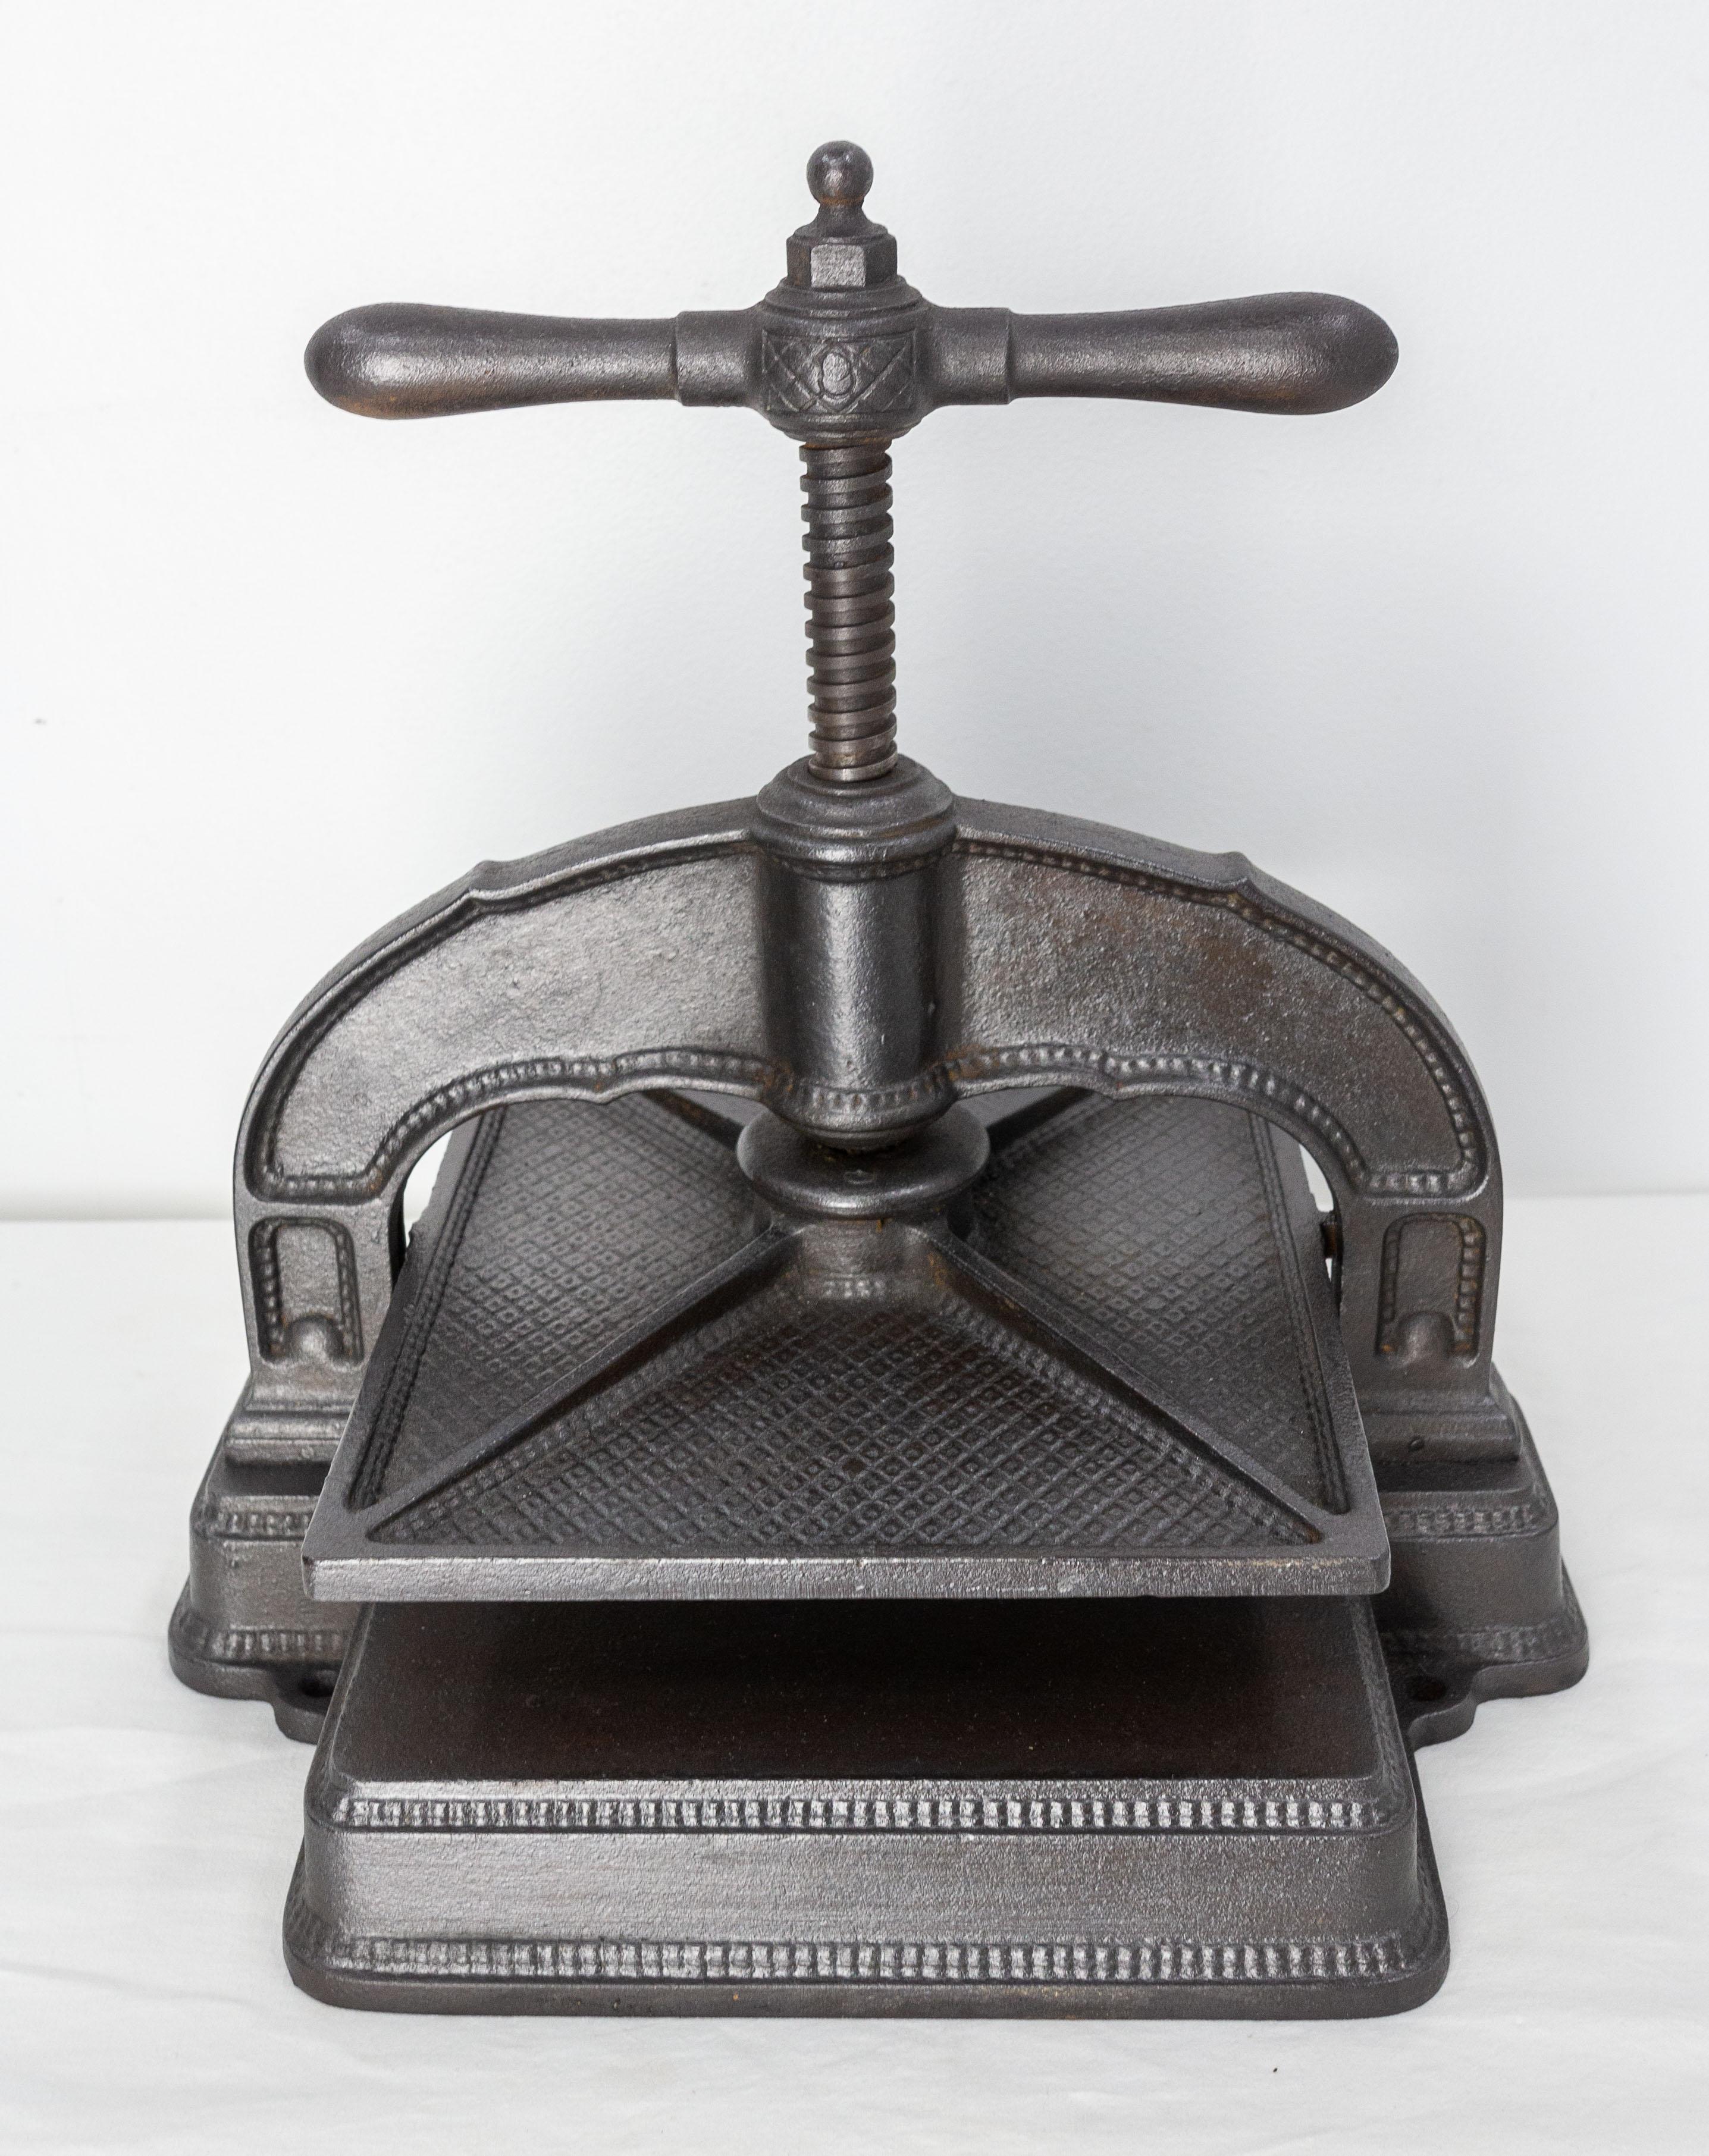 This wrought iron book press was made in the late 19th century in France for a workshop
Many parts of this object are worked, which makes it a very beautiful piece, very characterful.

Shipping:
P31 L36 H 32 14.2 kg.